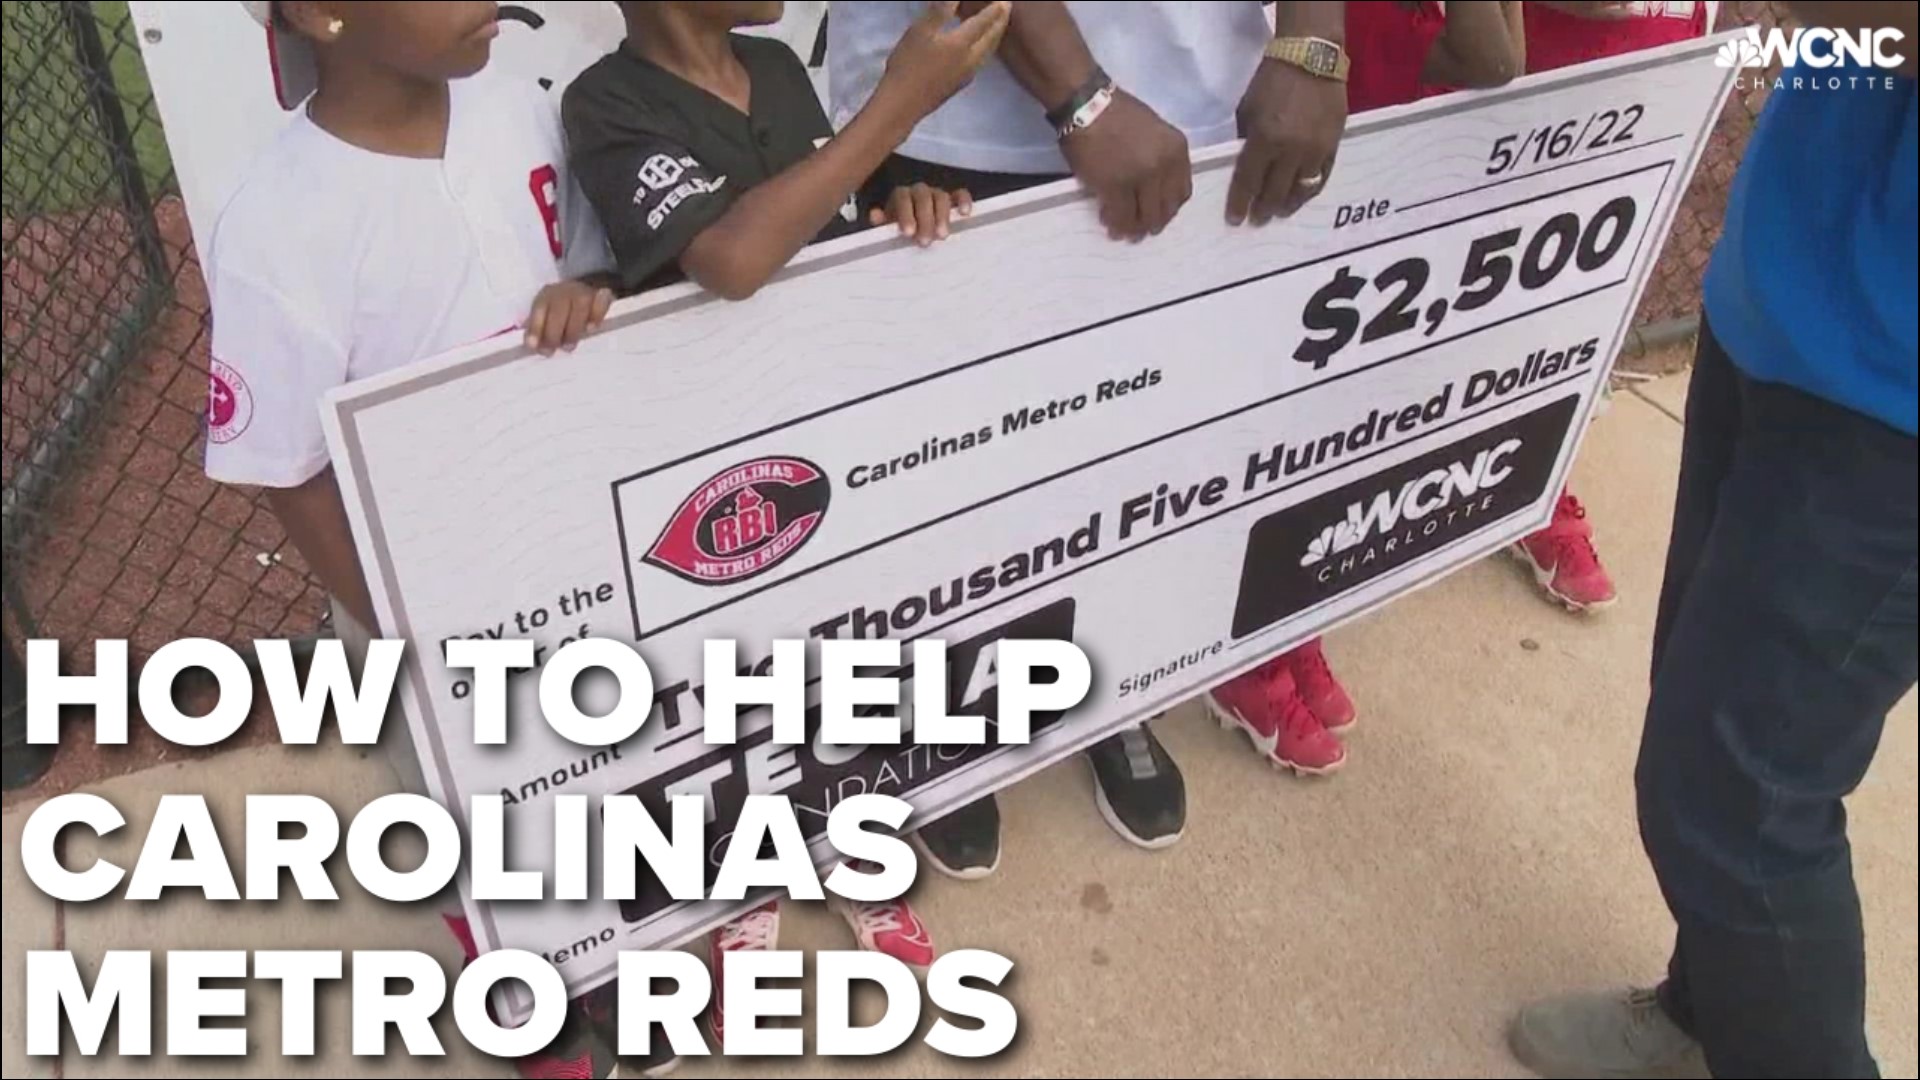 The Carolinas Metro Reds give underserved kids a chance to play baseball.